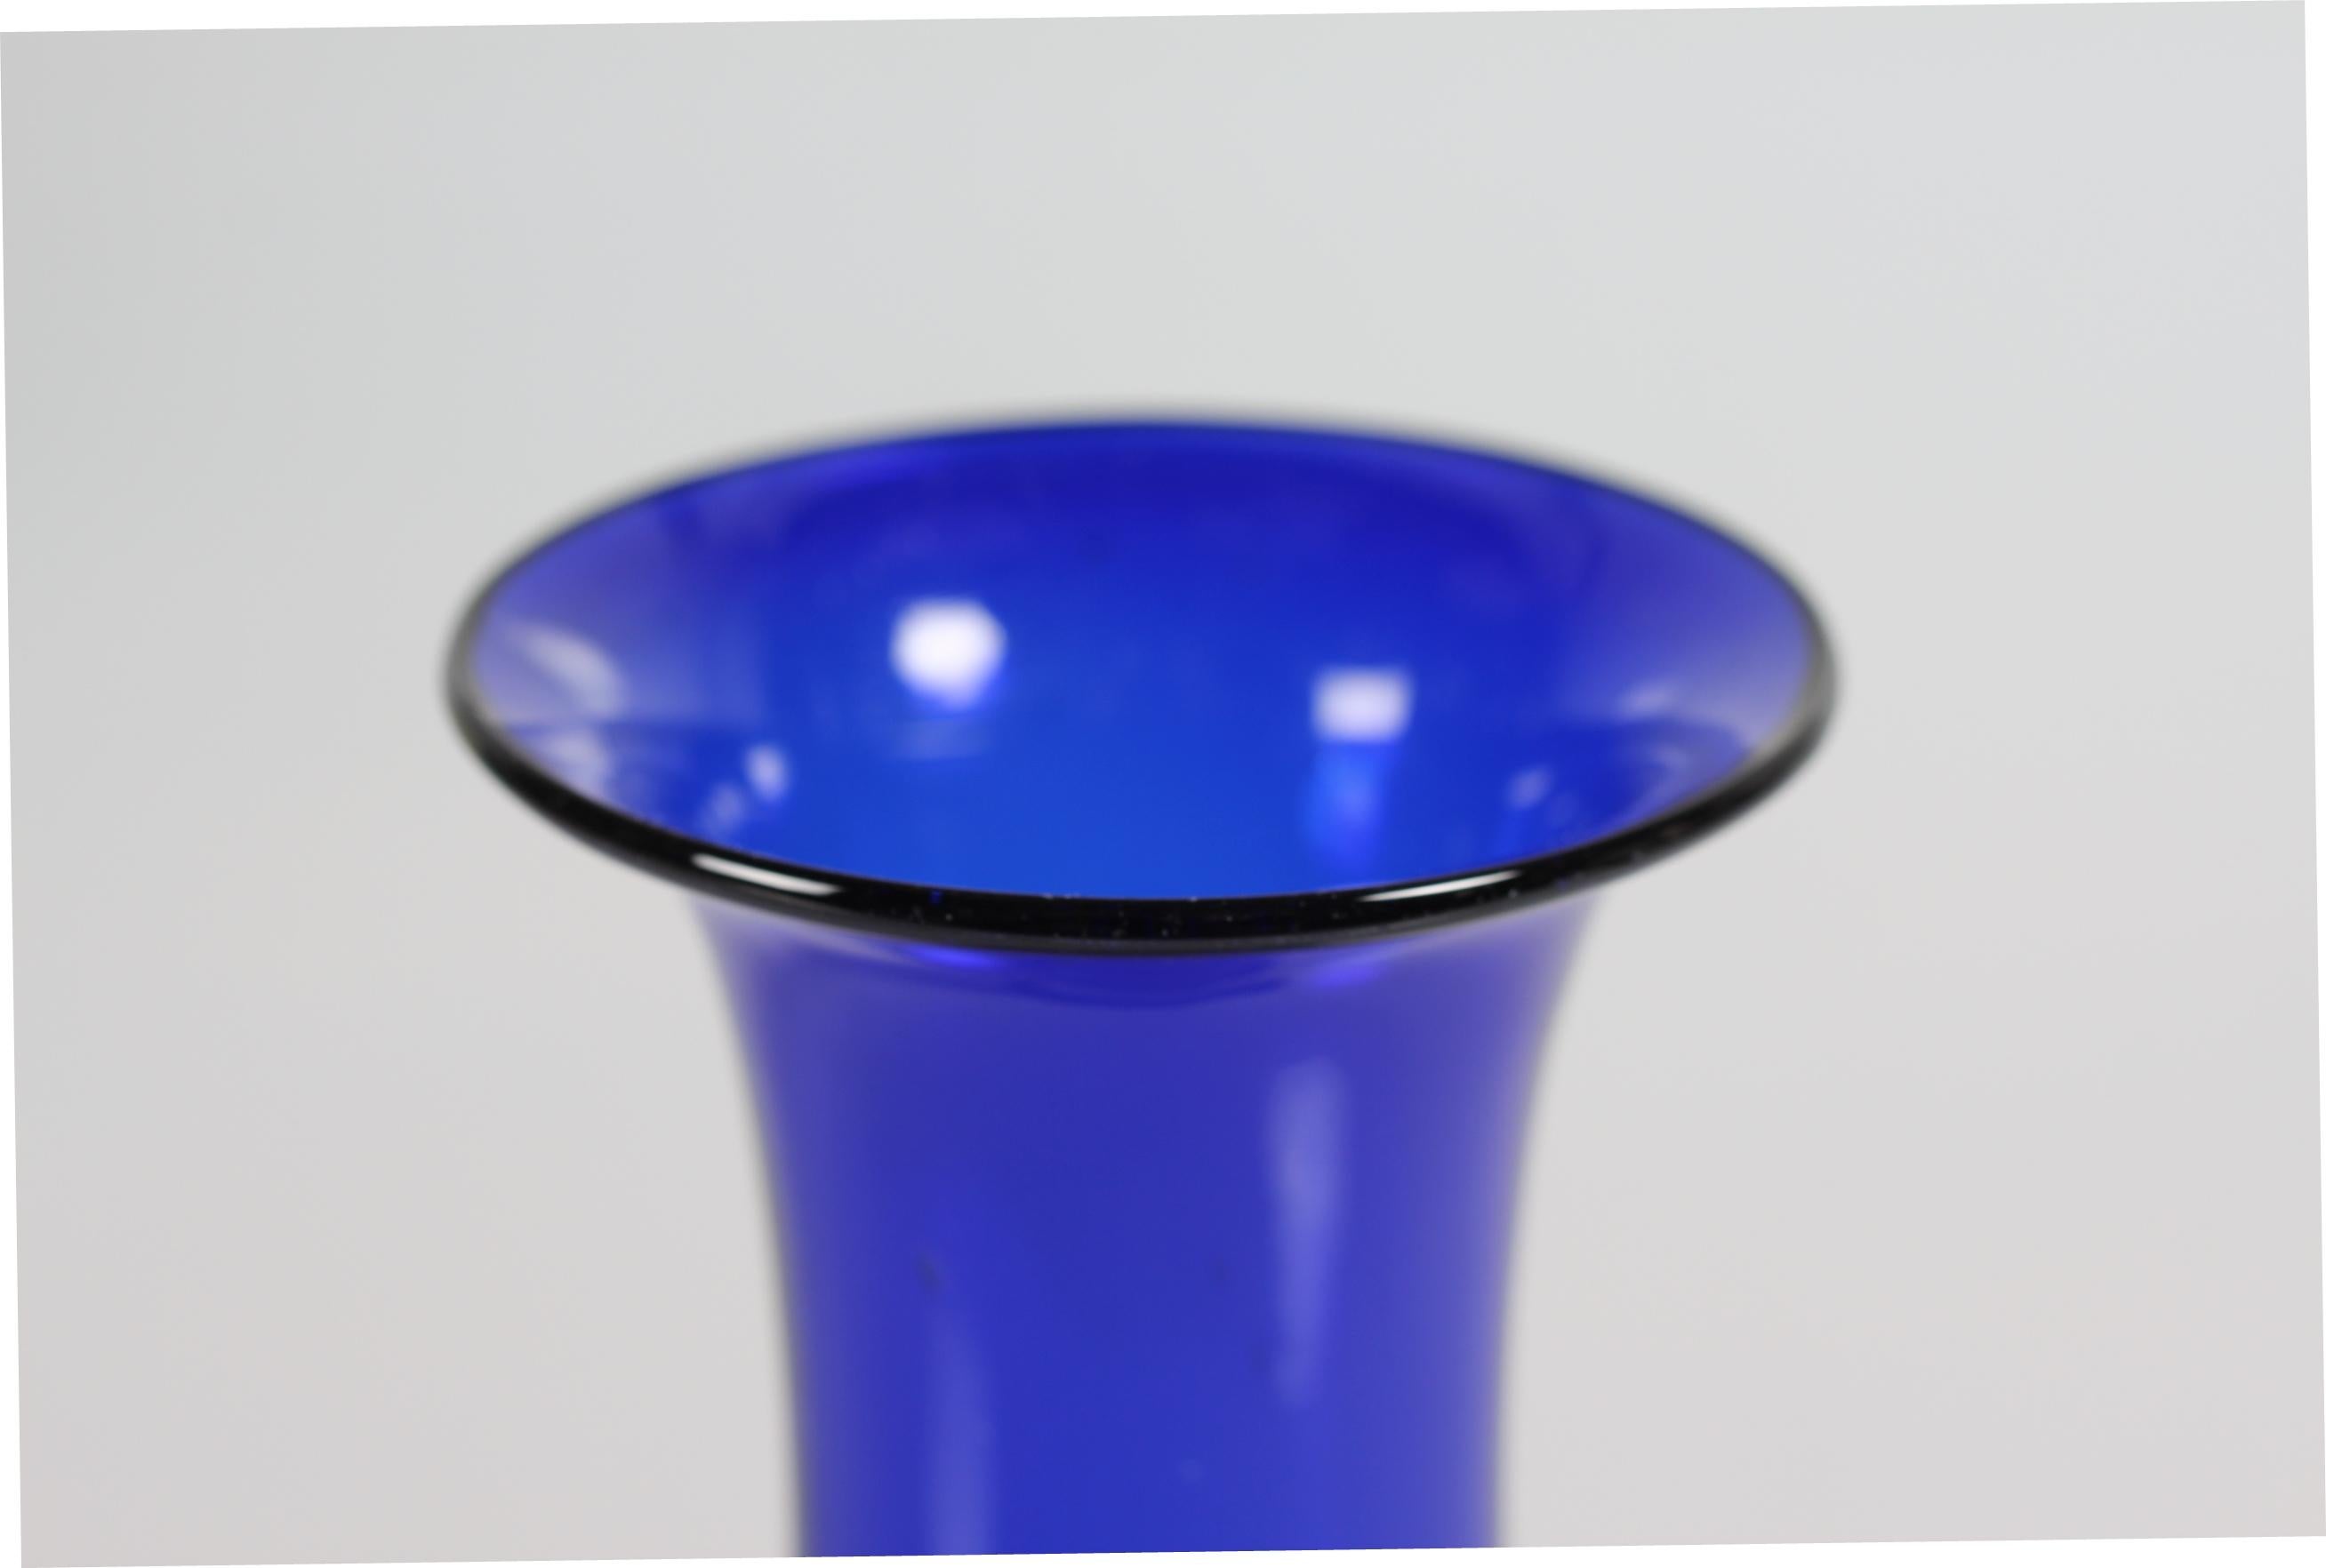 Old Danish hyacinth glass or vase from Holmegaard or Kastrup glassworks, circa 1850.
It is registered in the Holmegaard catalog in 1853

The smooth mouth blown blue glass has a baluster form and a small foot

Measures: Height 21 cm
Diameter 8